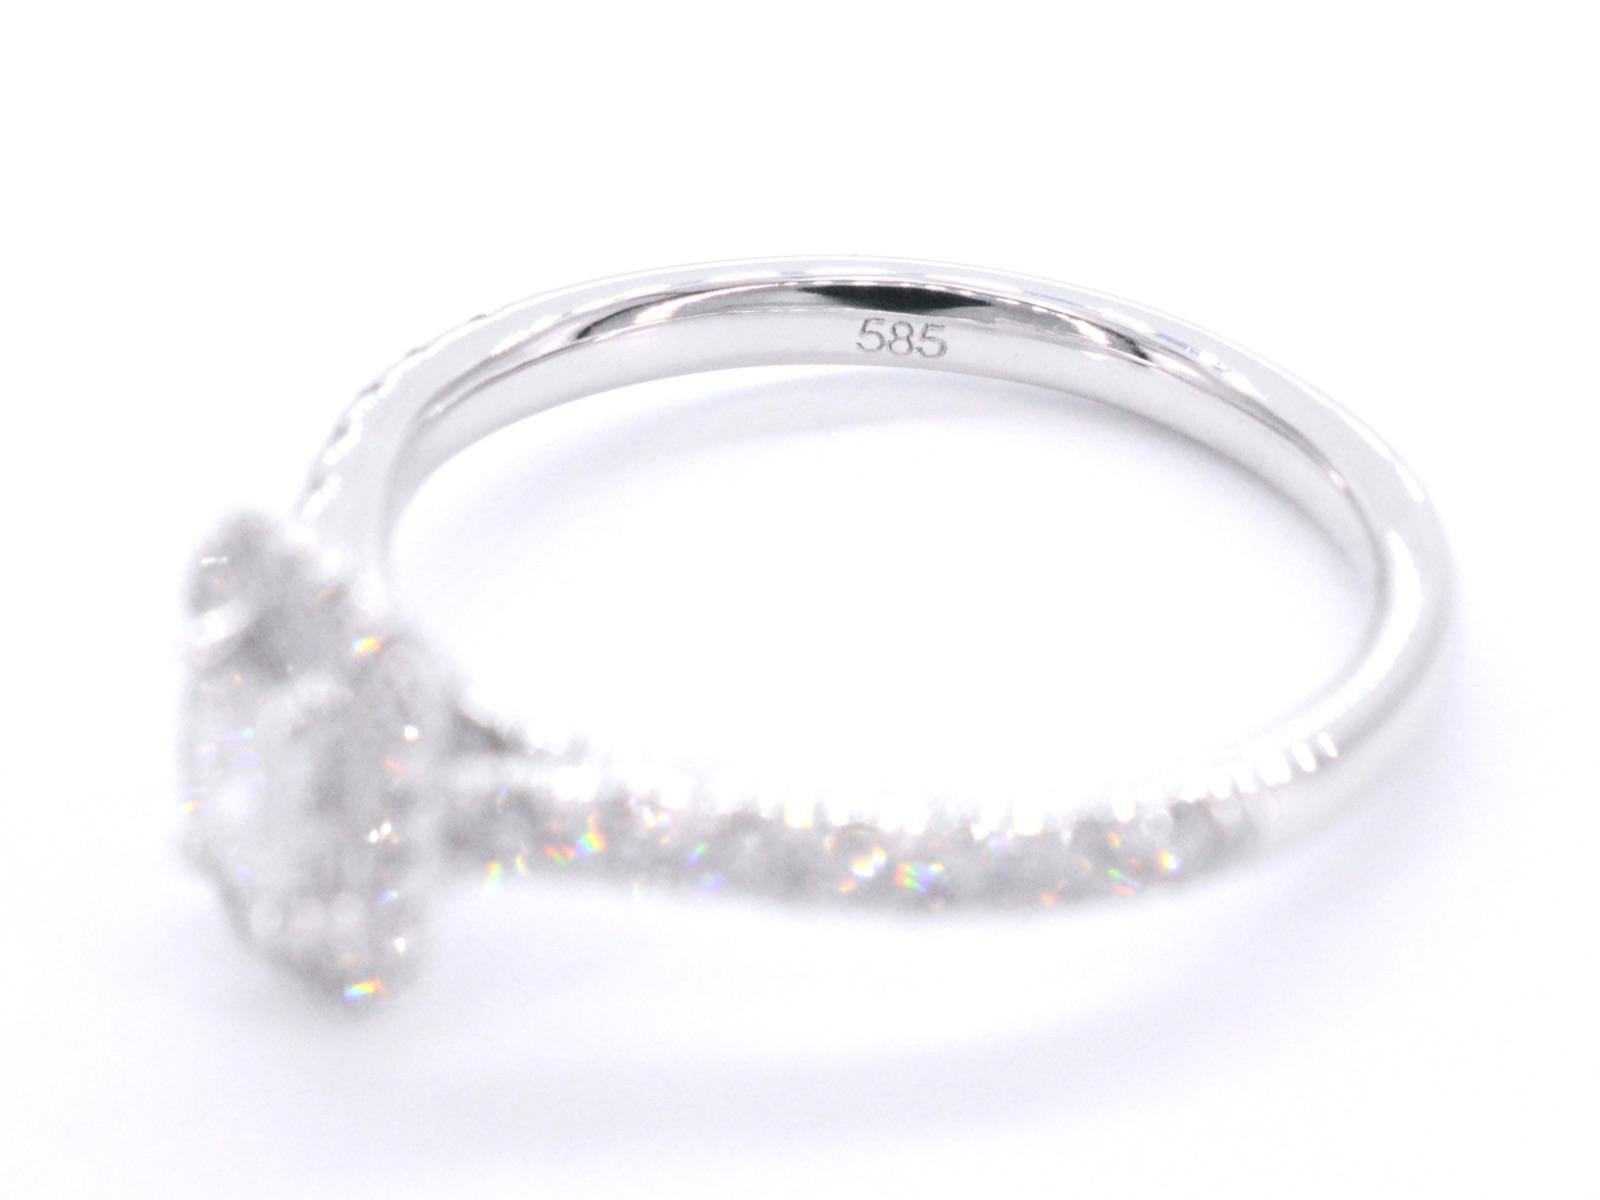 Brilliant Cut White Gold Entourage Ring with Brilliant and Baguette Cut Diamonds For Sale